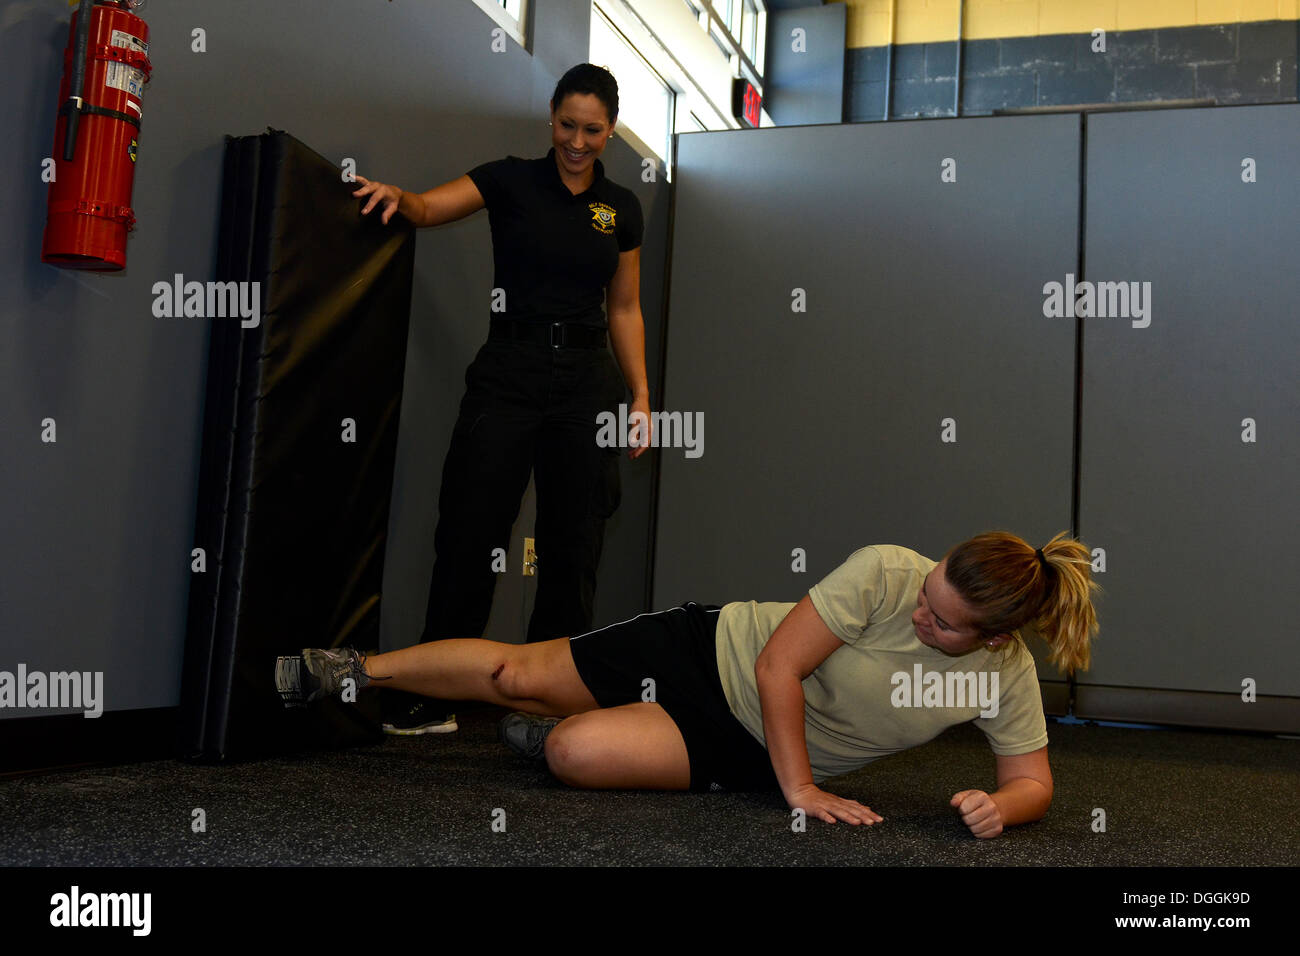 U.S. Air Force Airmen assigned to the 169th Fighter Wing at McEntire Joint National Guard Base, South Carolina Air National Guard, participate in a “females only” self-defense class provided by the Richland County Sherriff’s Department, Oct. 6, 2013. Stock Photo